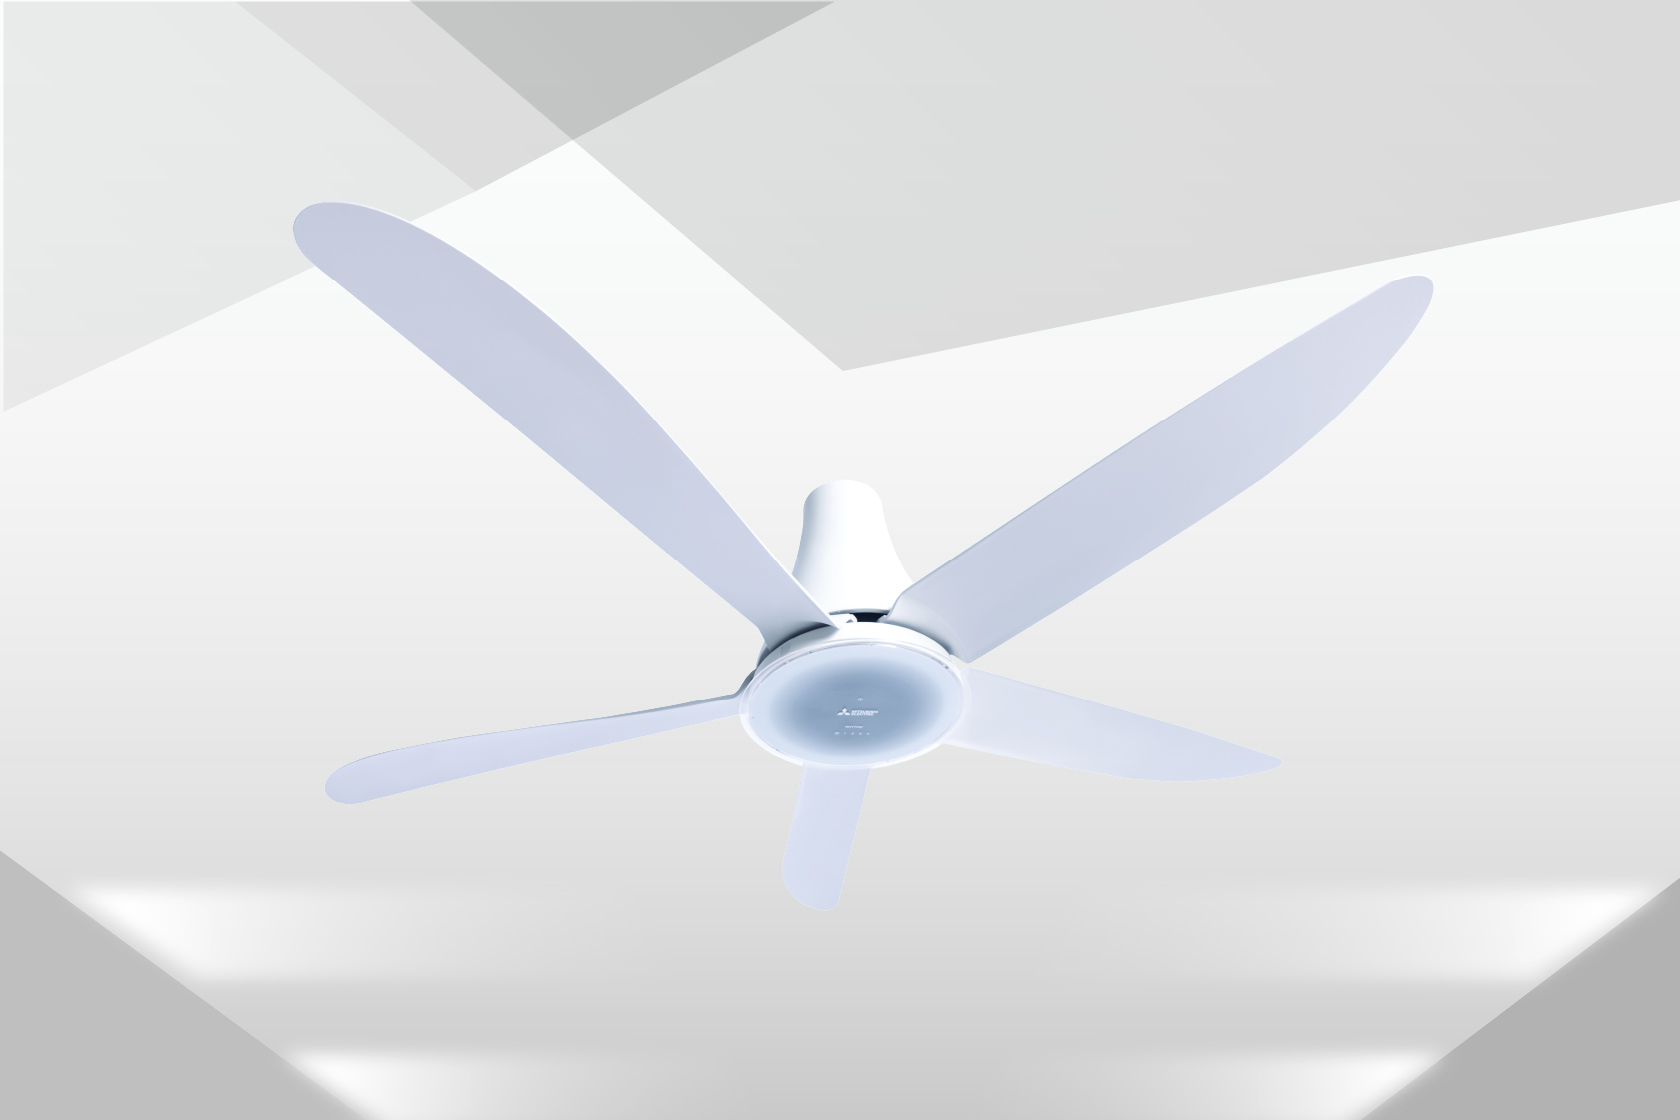 Common Mistakes to Avoid When Using Ceiling Fans